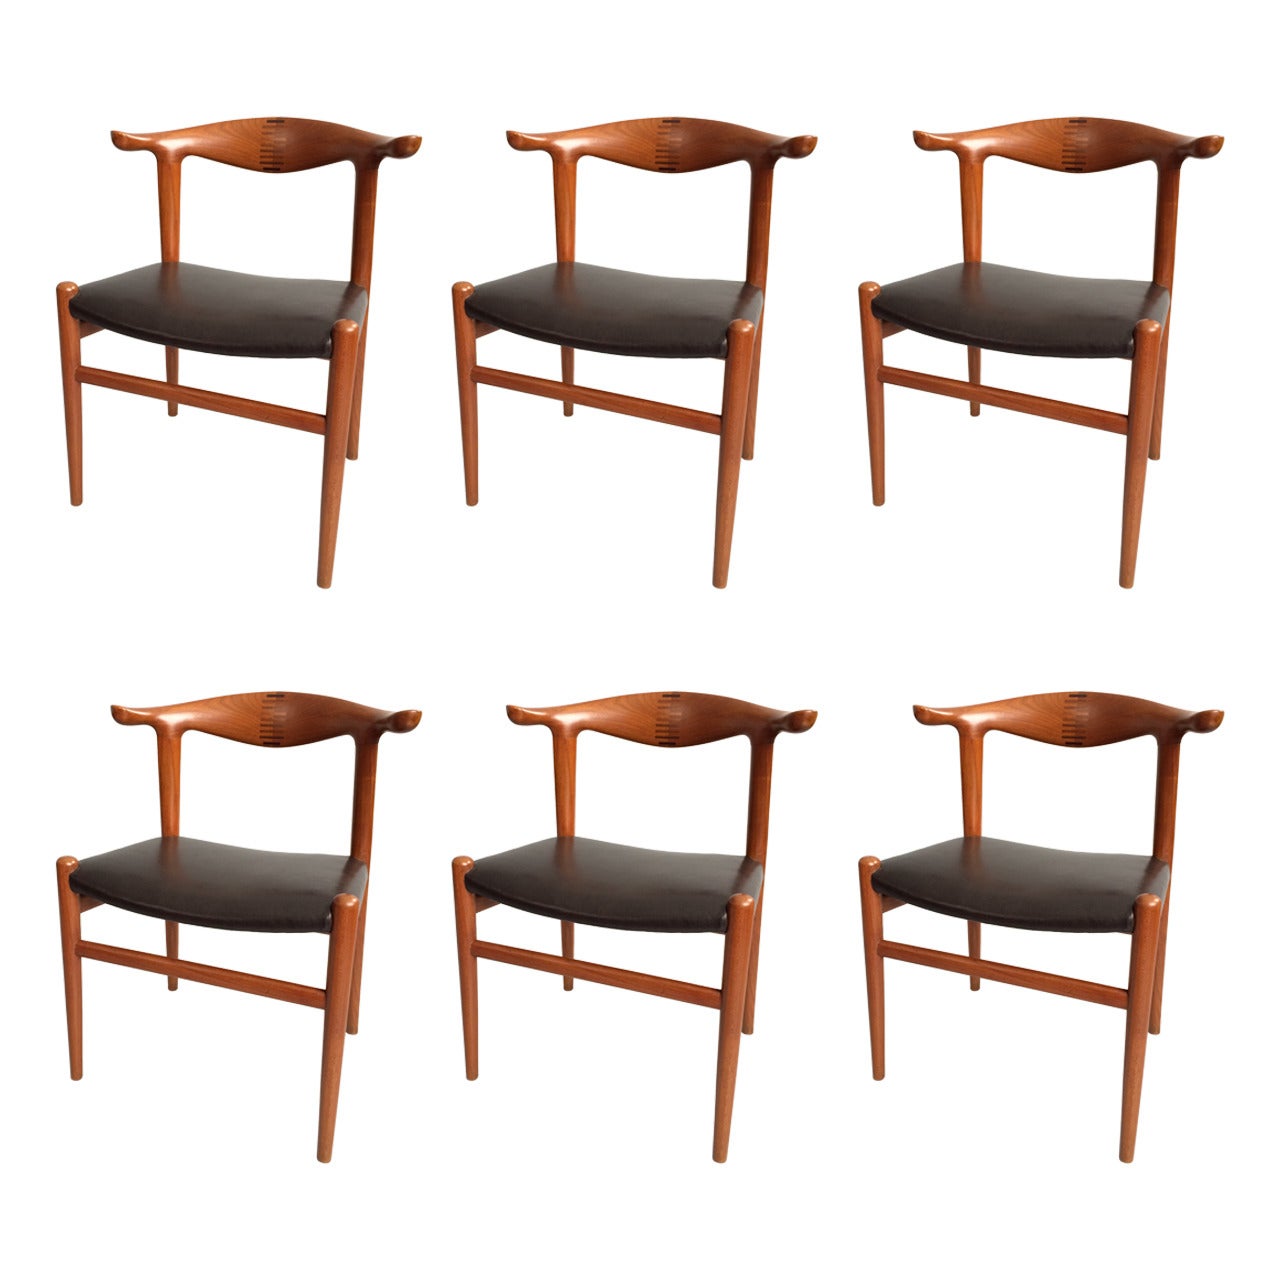 Set of Six "Cow Horn" Armchairs "JH505" Designed by Hans Wegner